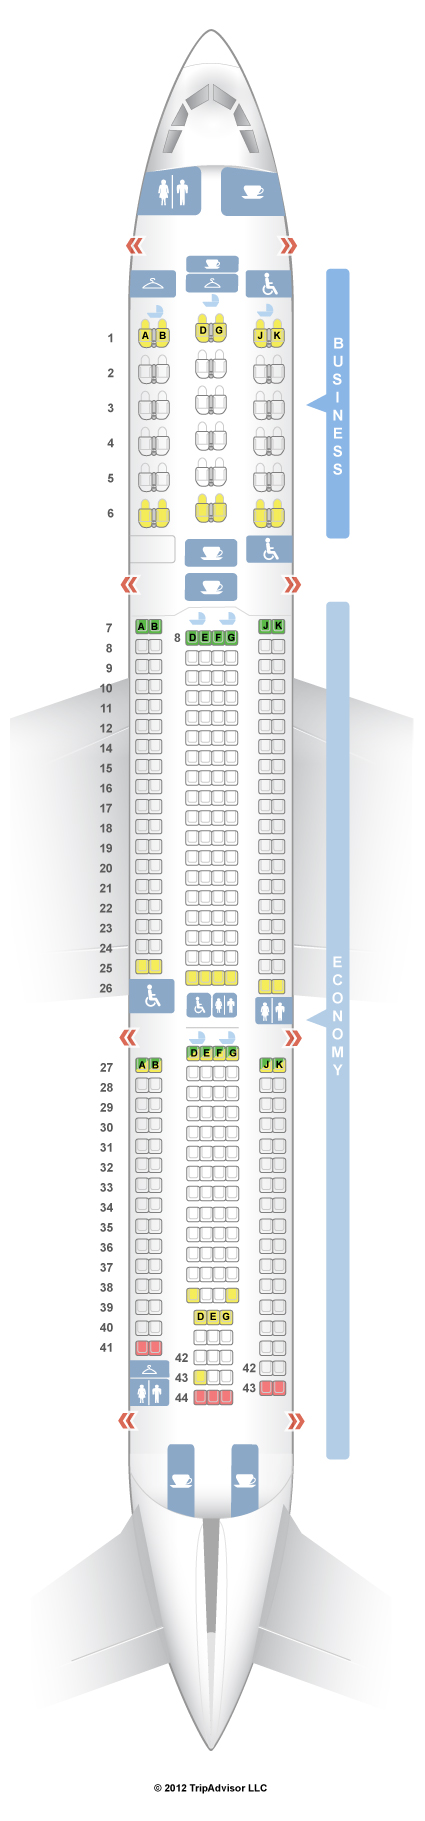 Lufthansa Airbus Industrie A330 300 Seating Chart